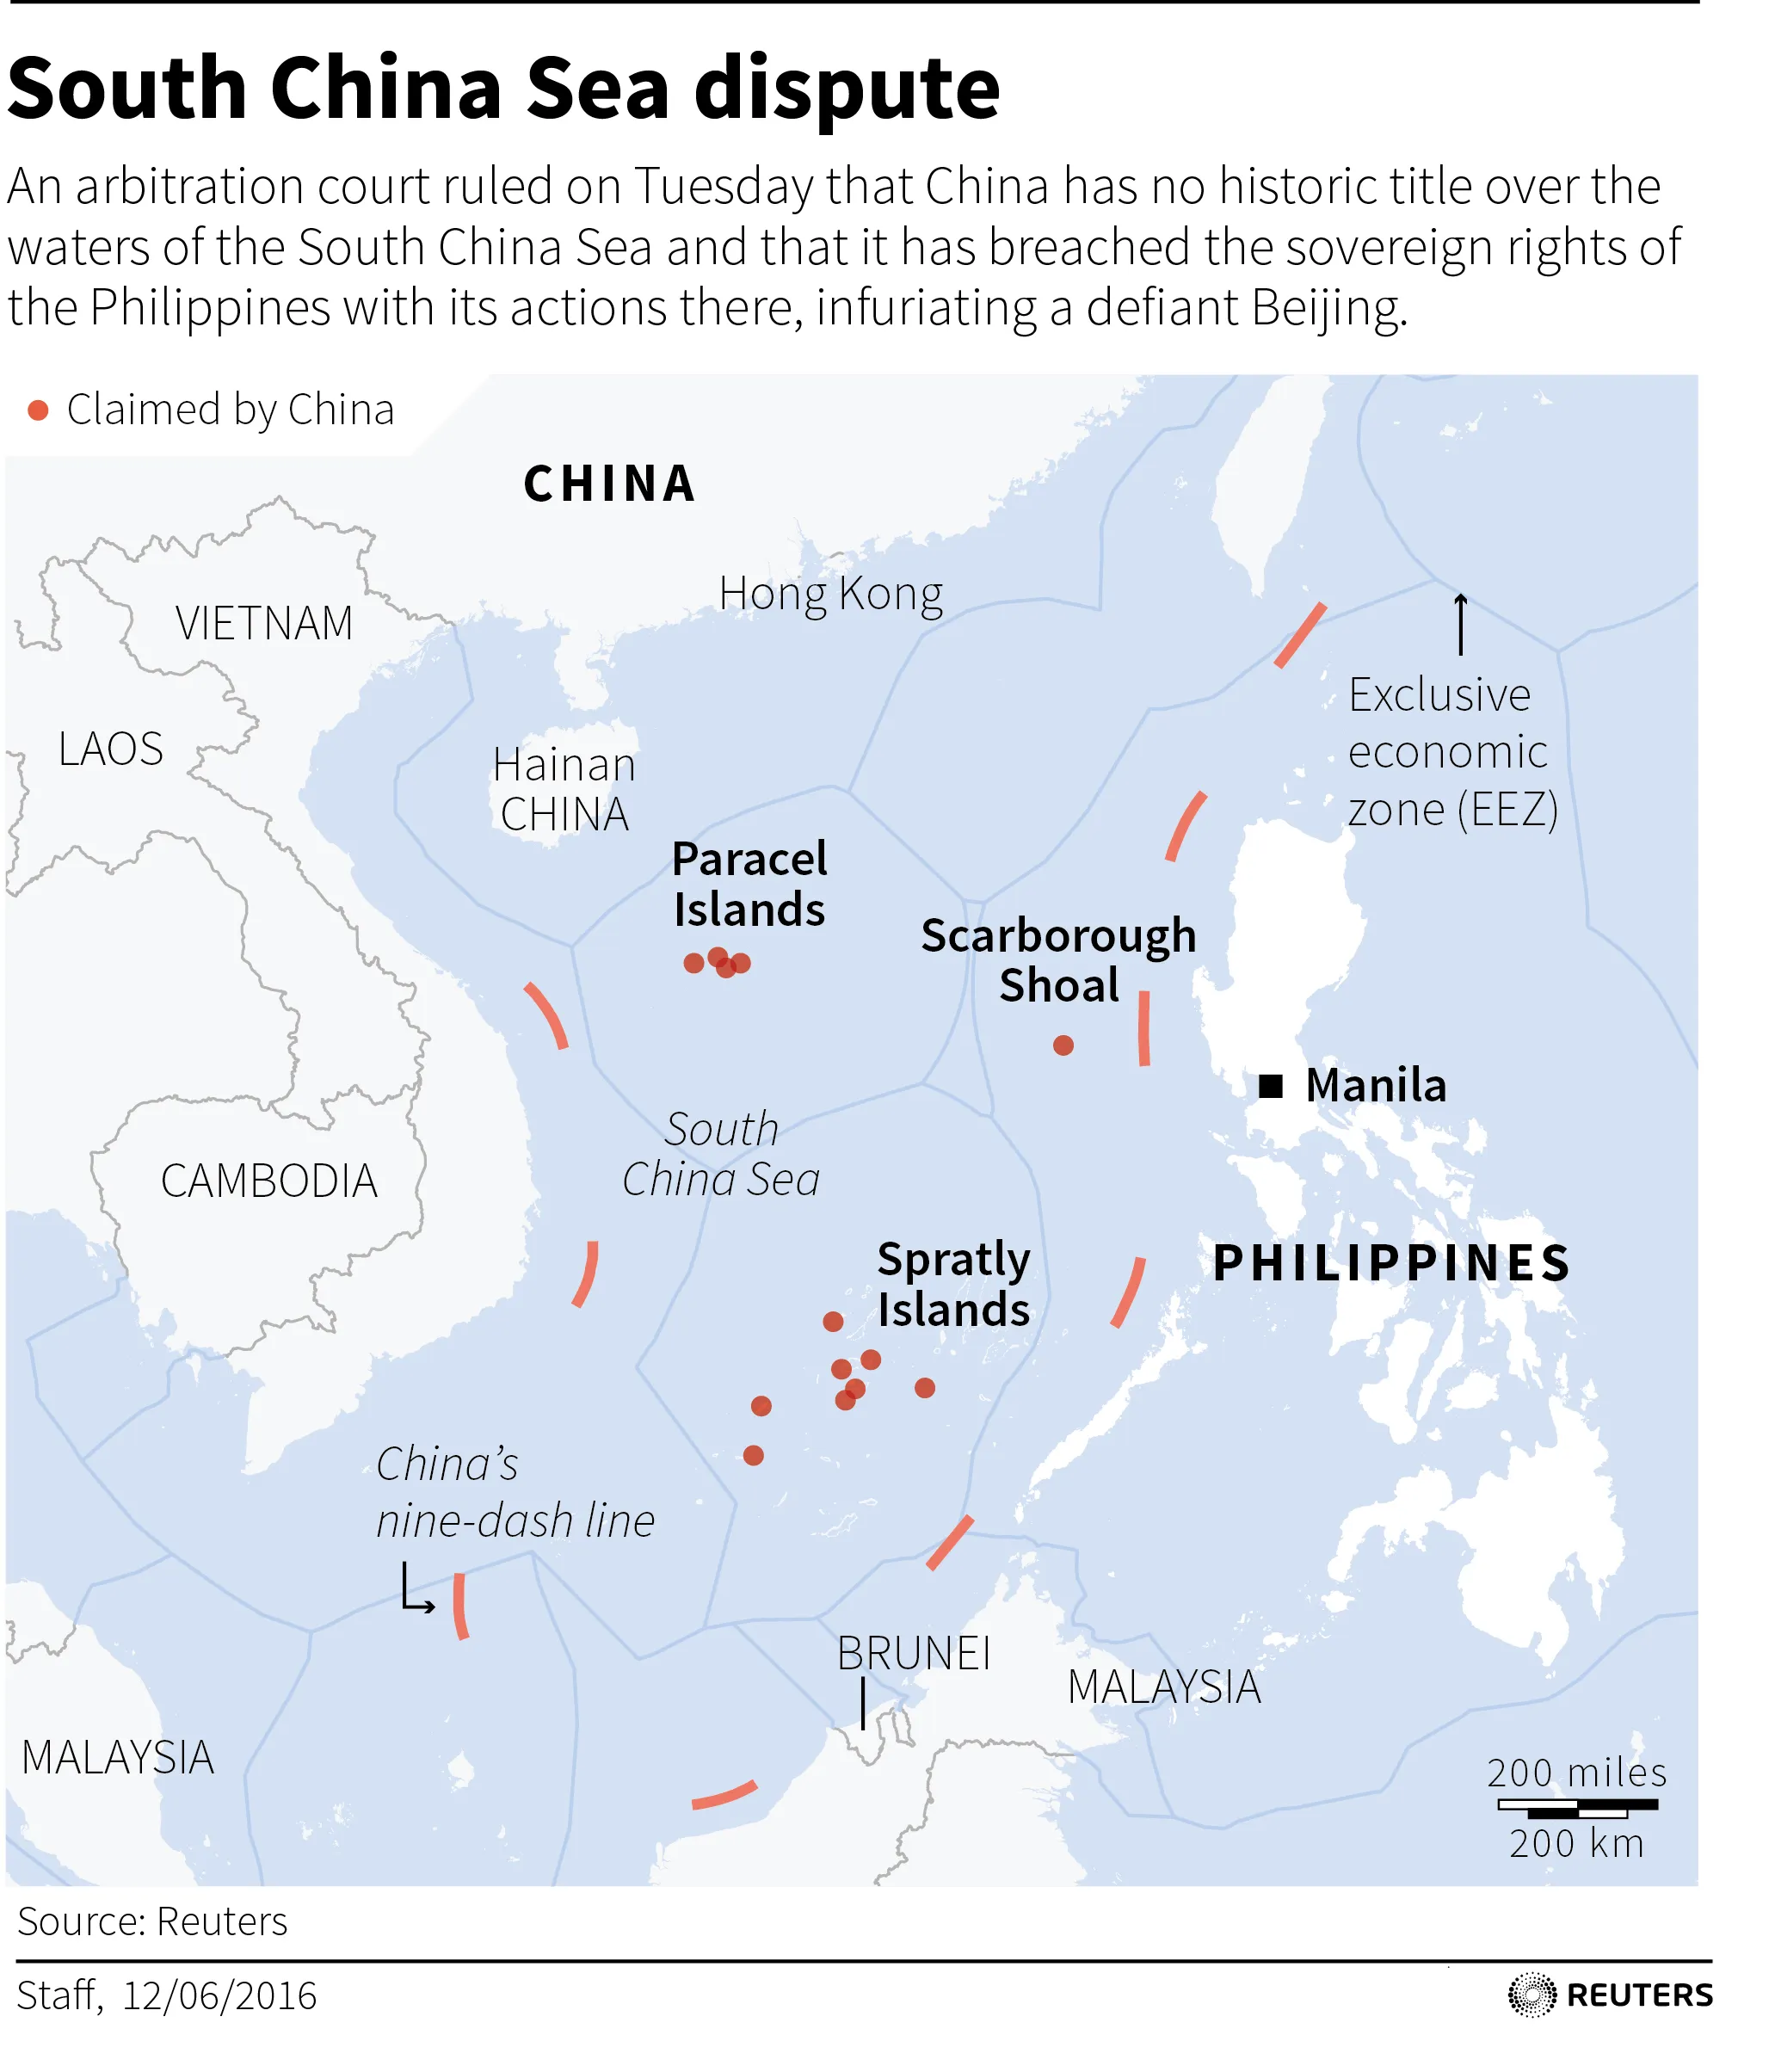 Map of South China Sea disputed territories.